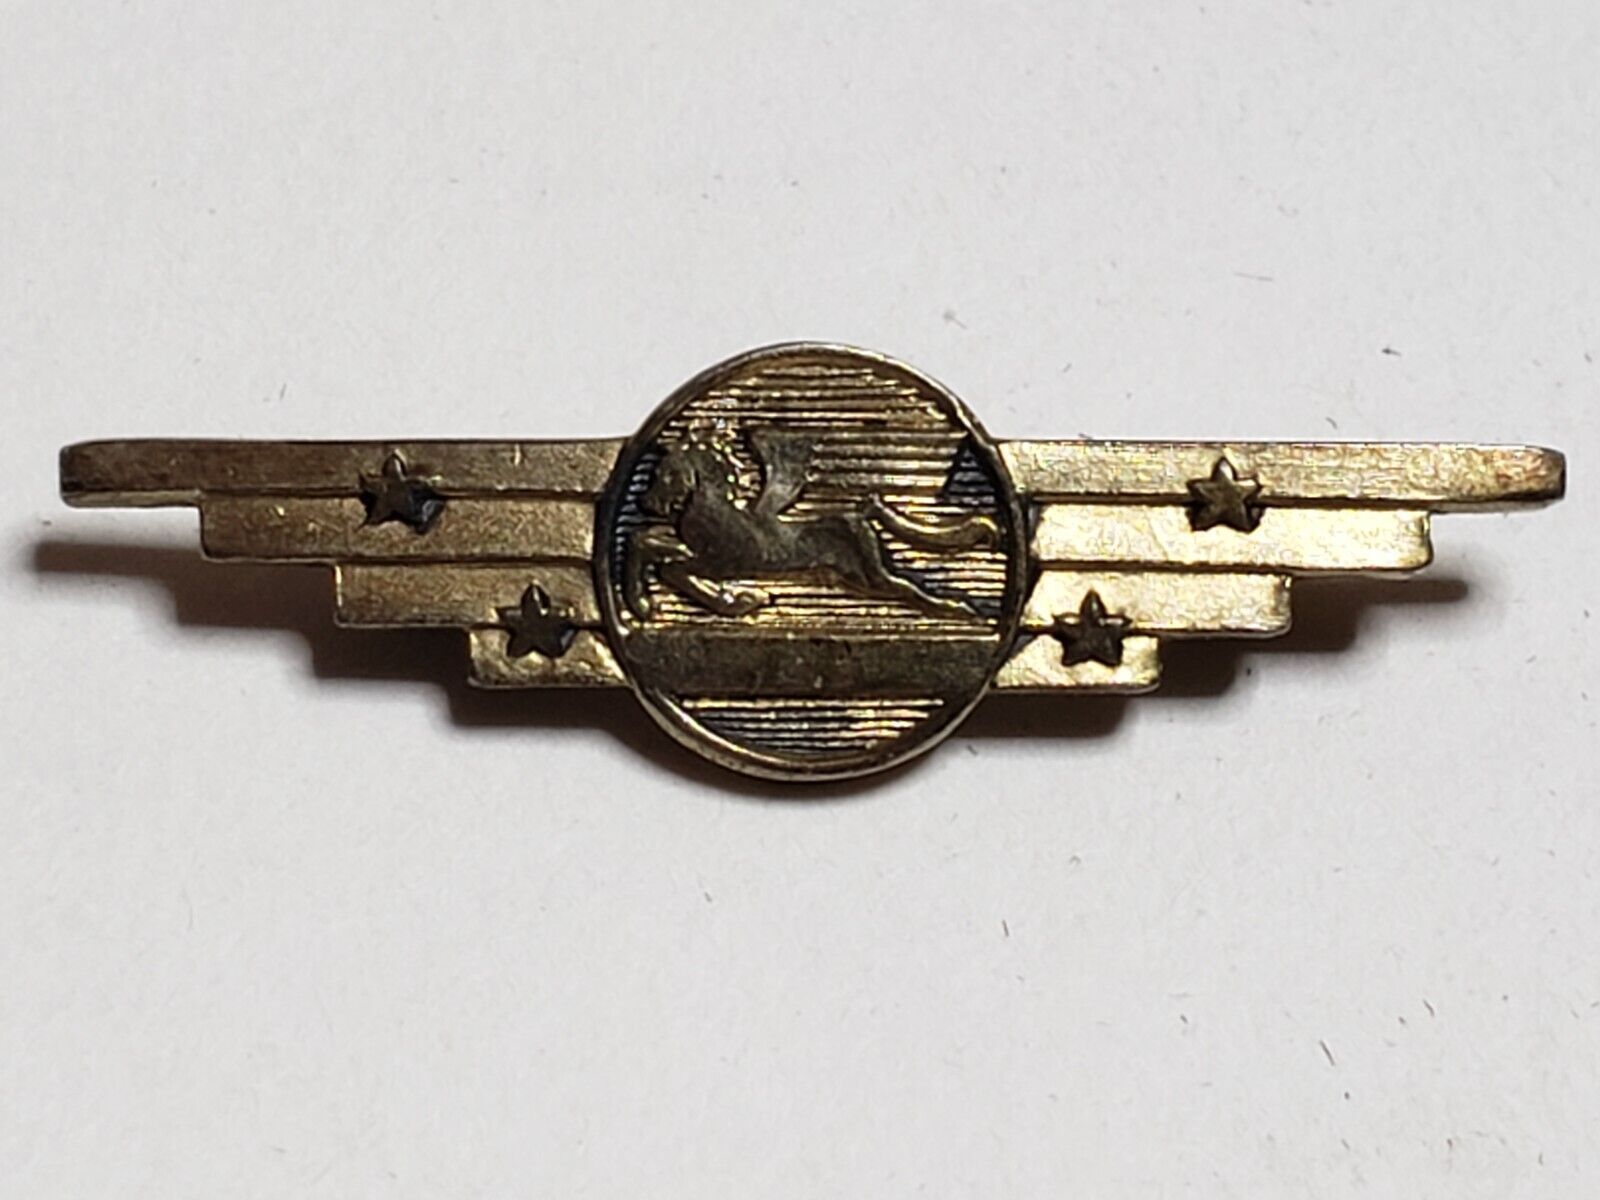 Vintage Fairchild Aviation Lapel Pin Sterling Pinback Marked FETTING Maybe WWII?